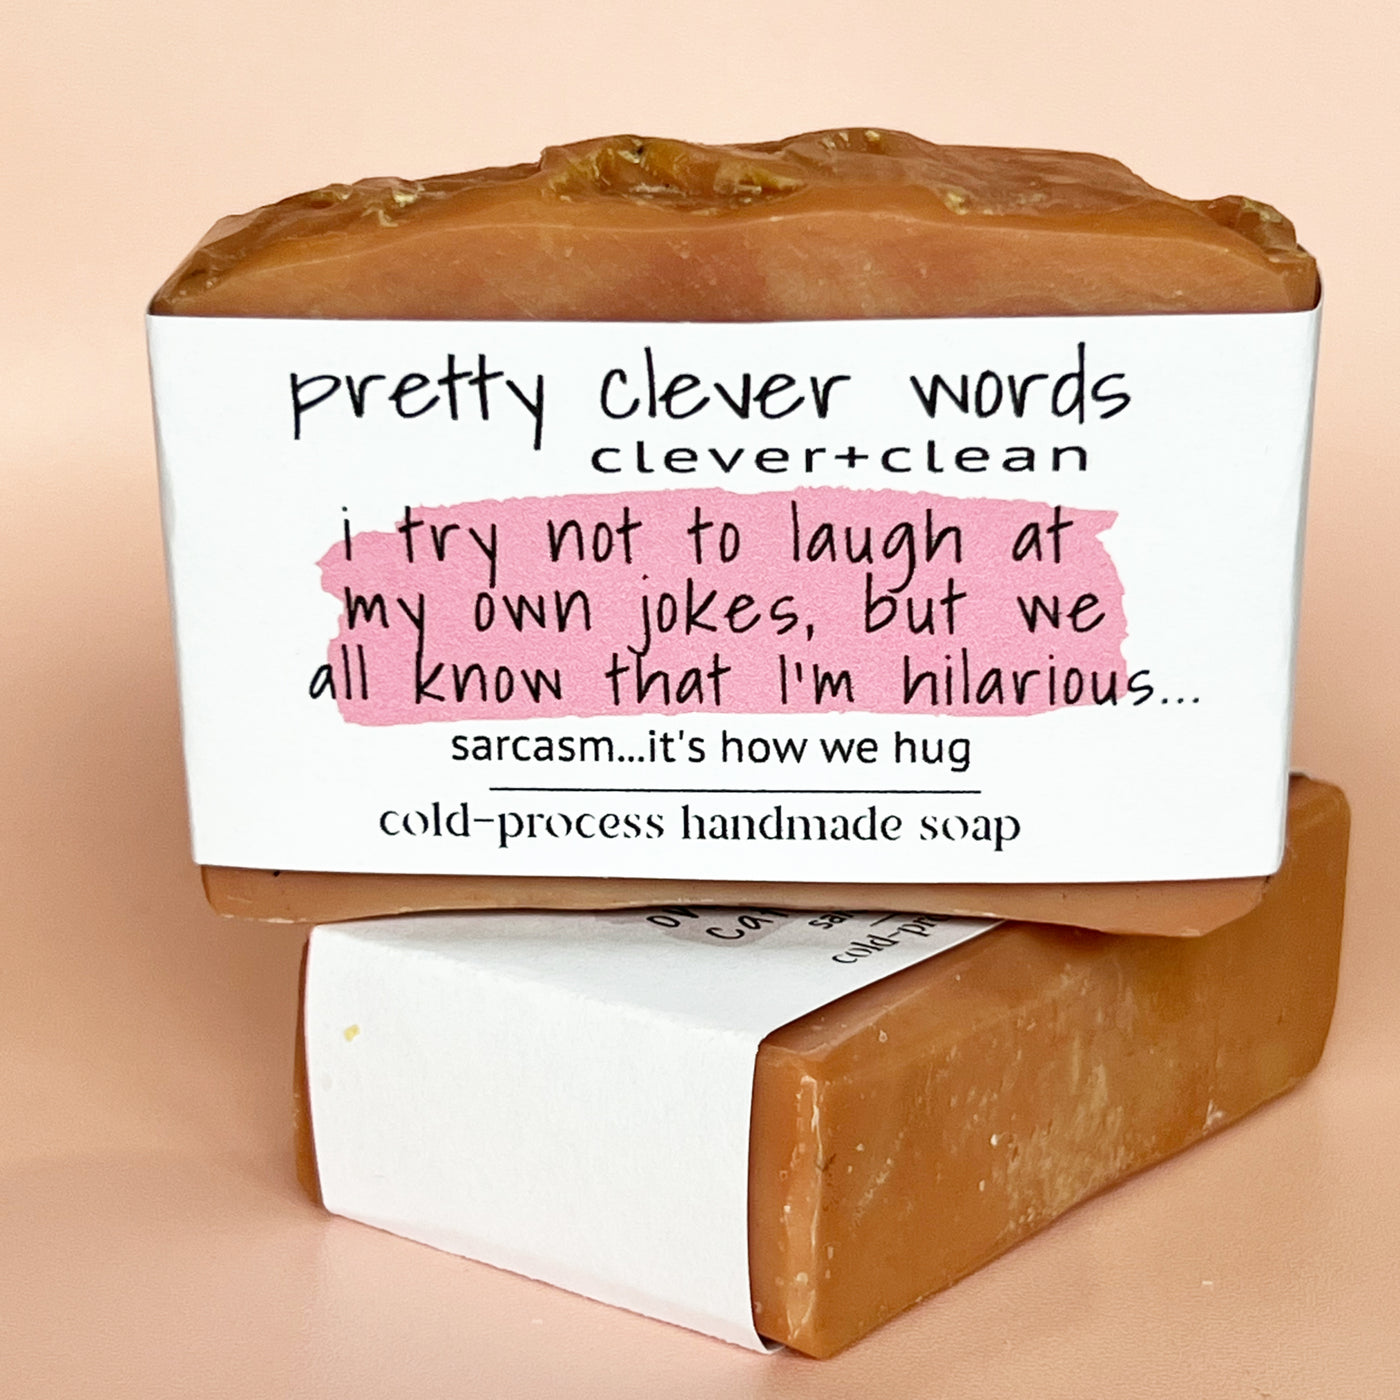 clever+clean rose clay bar soap - we all know I'm hilarious